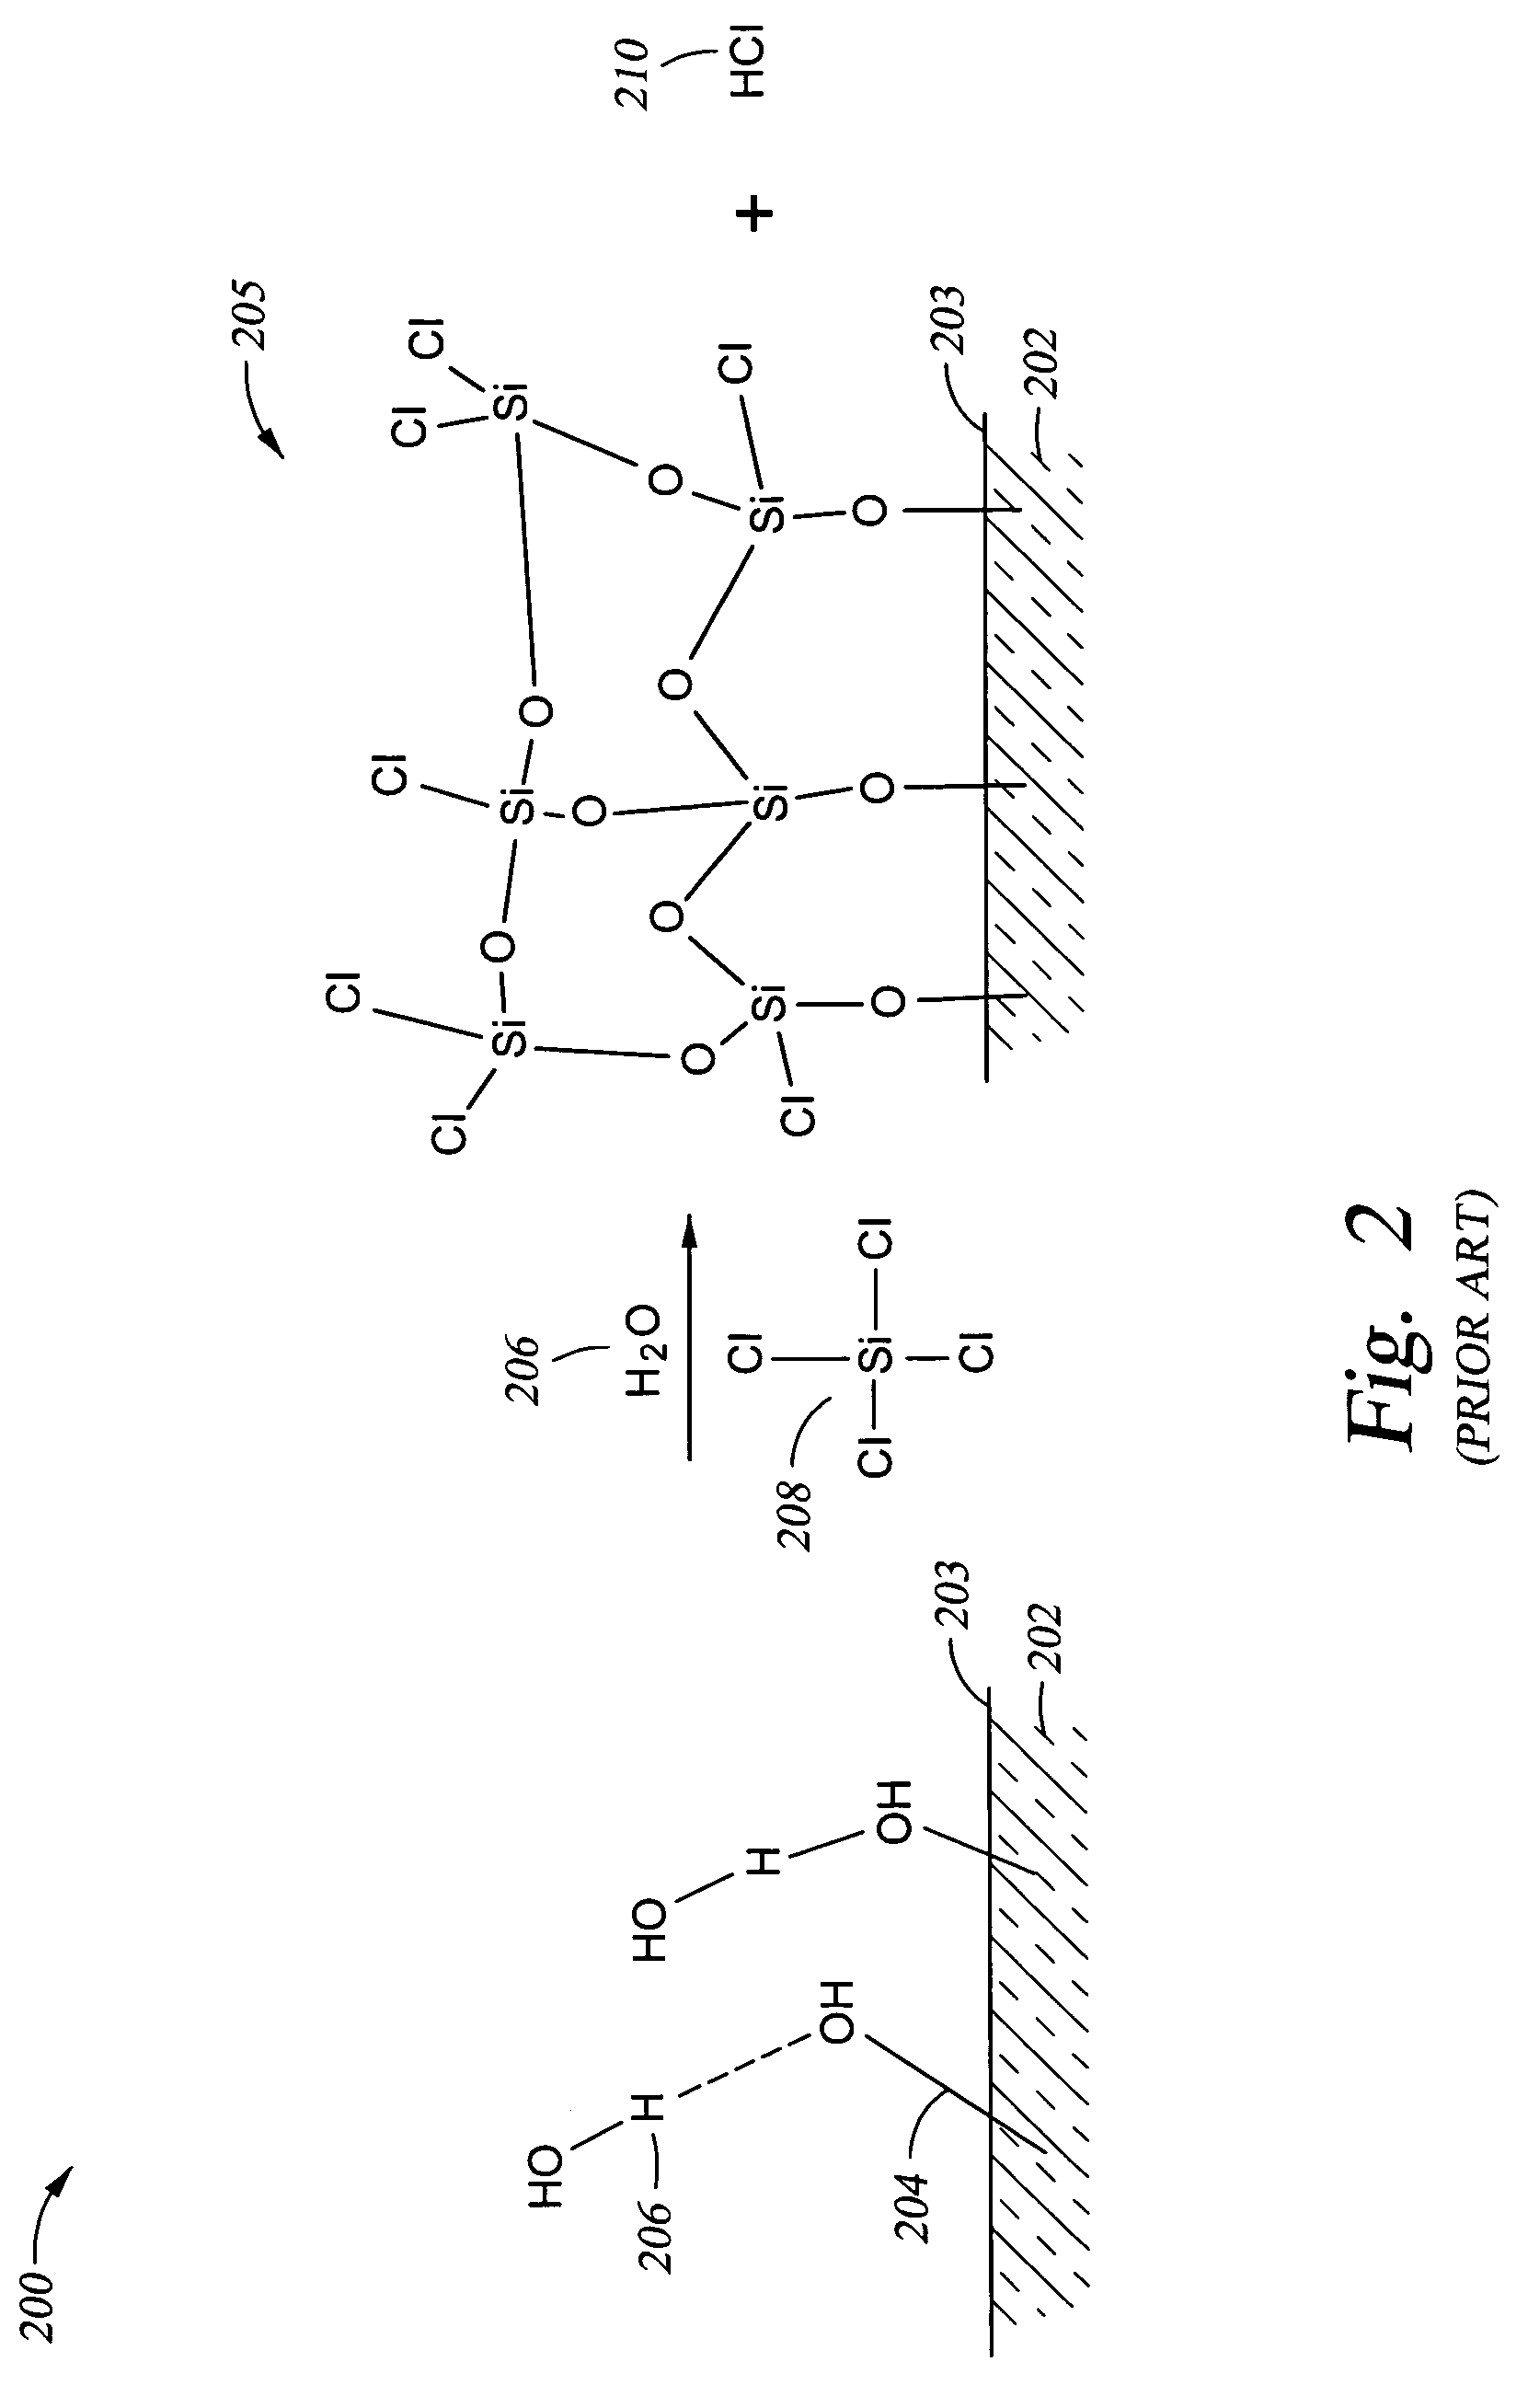 Controlled deposition of silicon-containing coatings adhered by an oxide layer